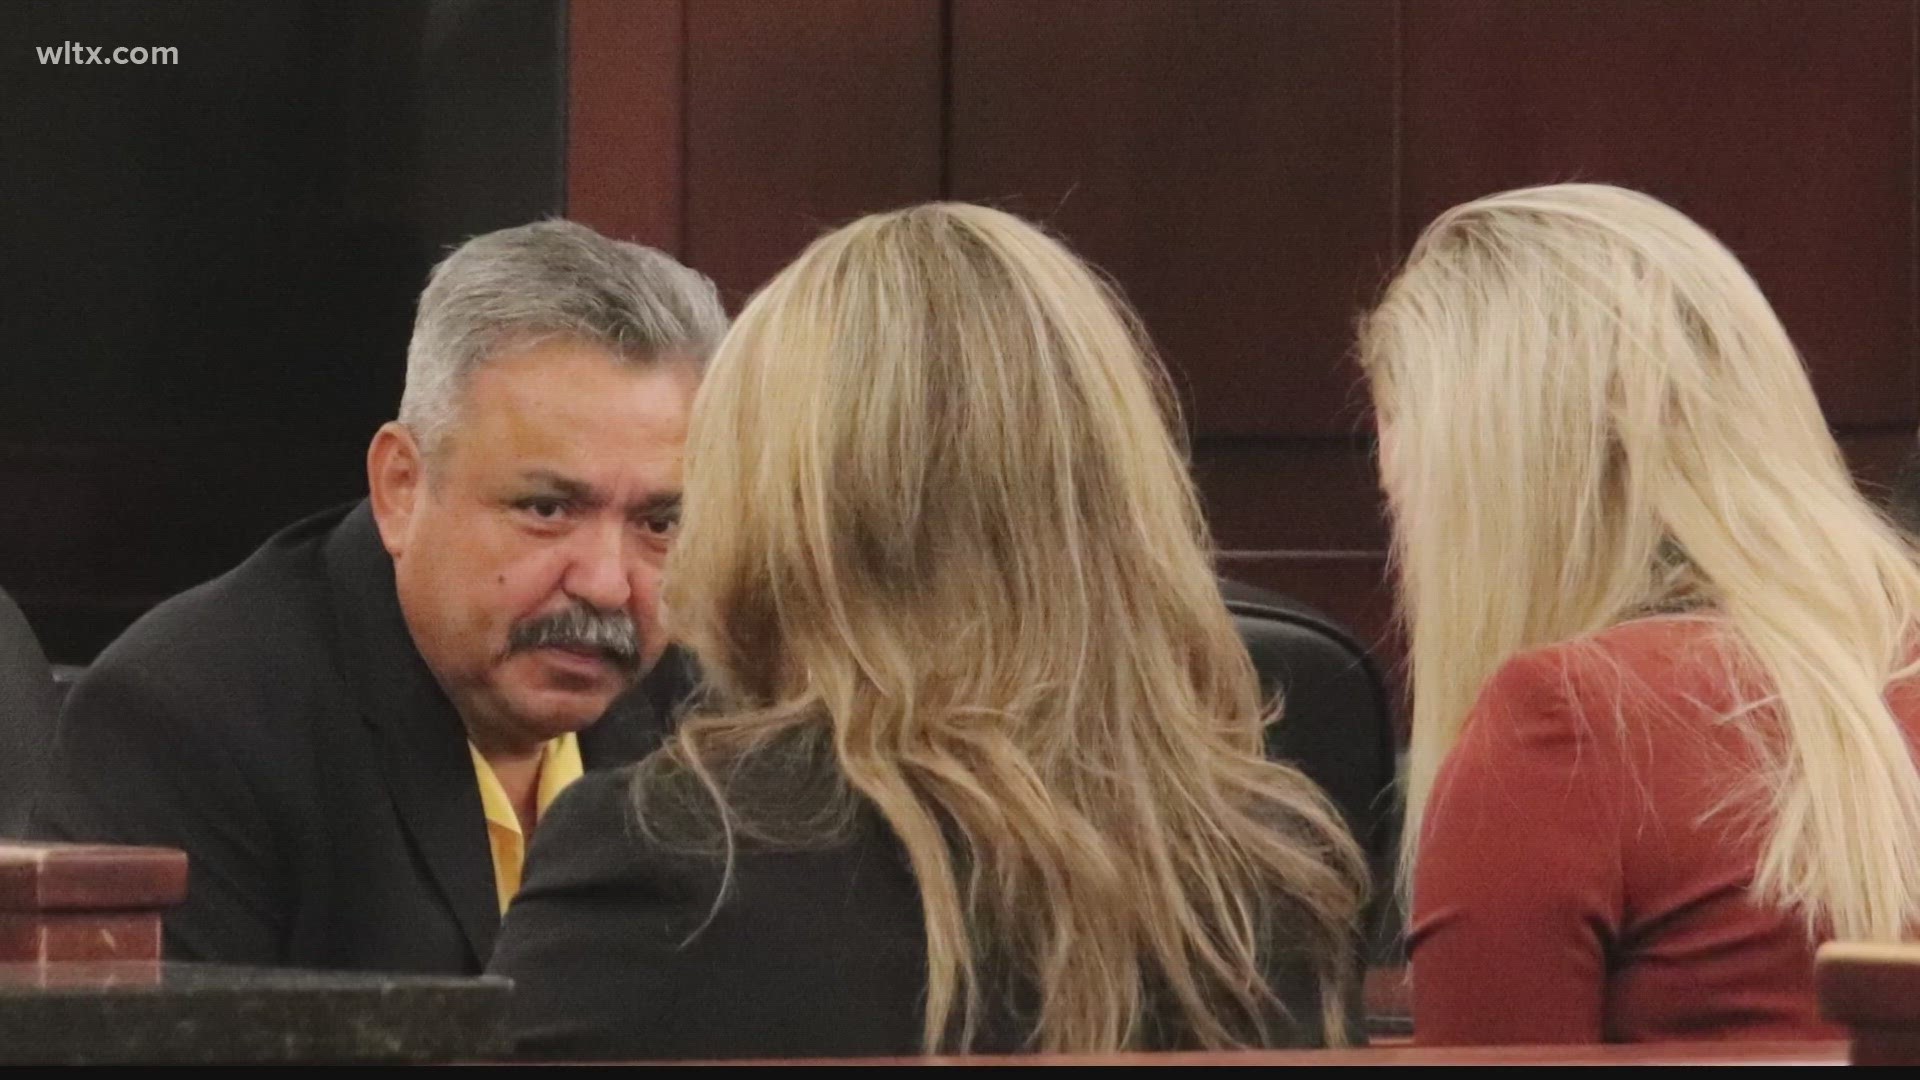 Local restaurant owner  Greg Leon is on trial for killing his wife's lover on Valentine's Day.